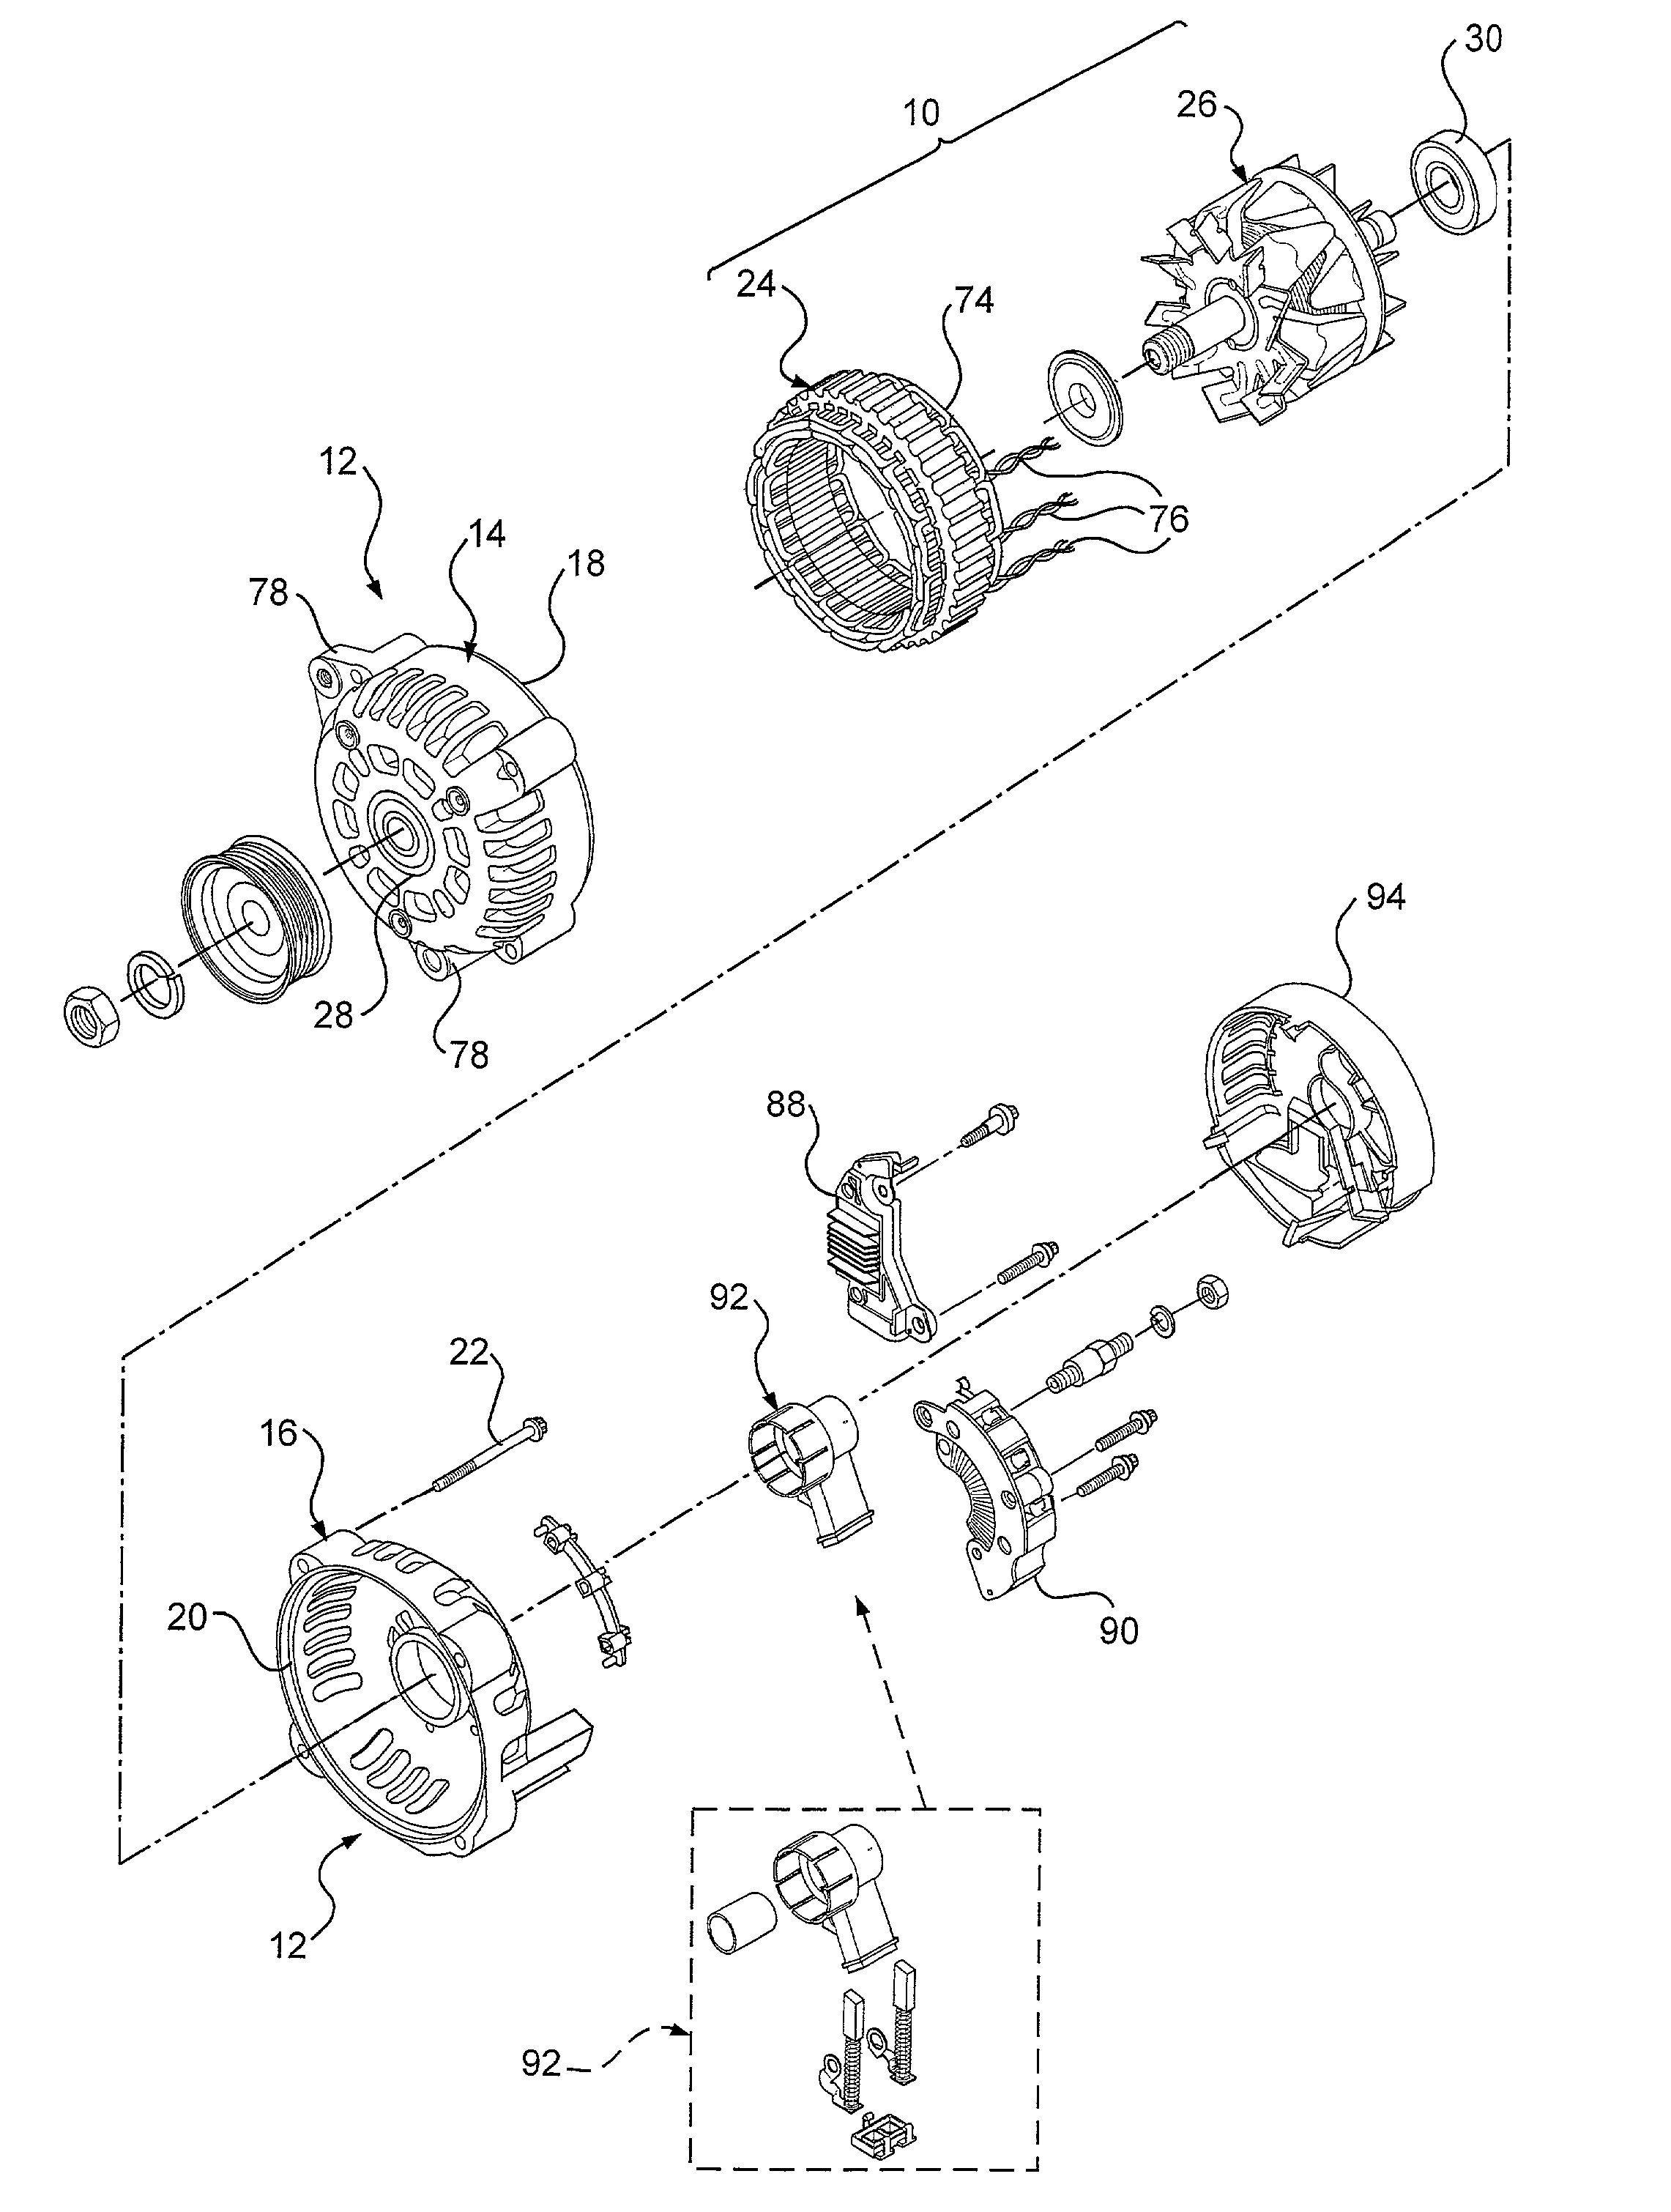 Alternator and method of manufacture